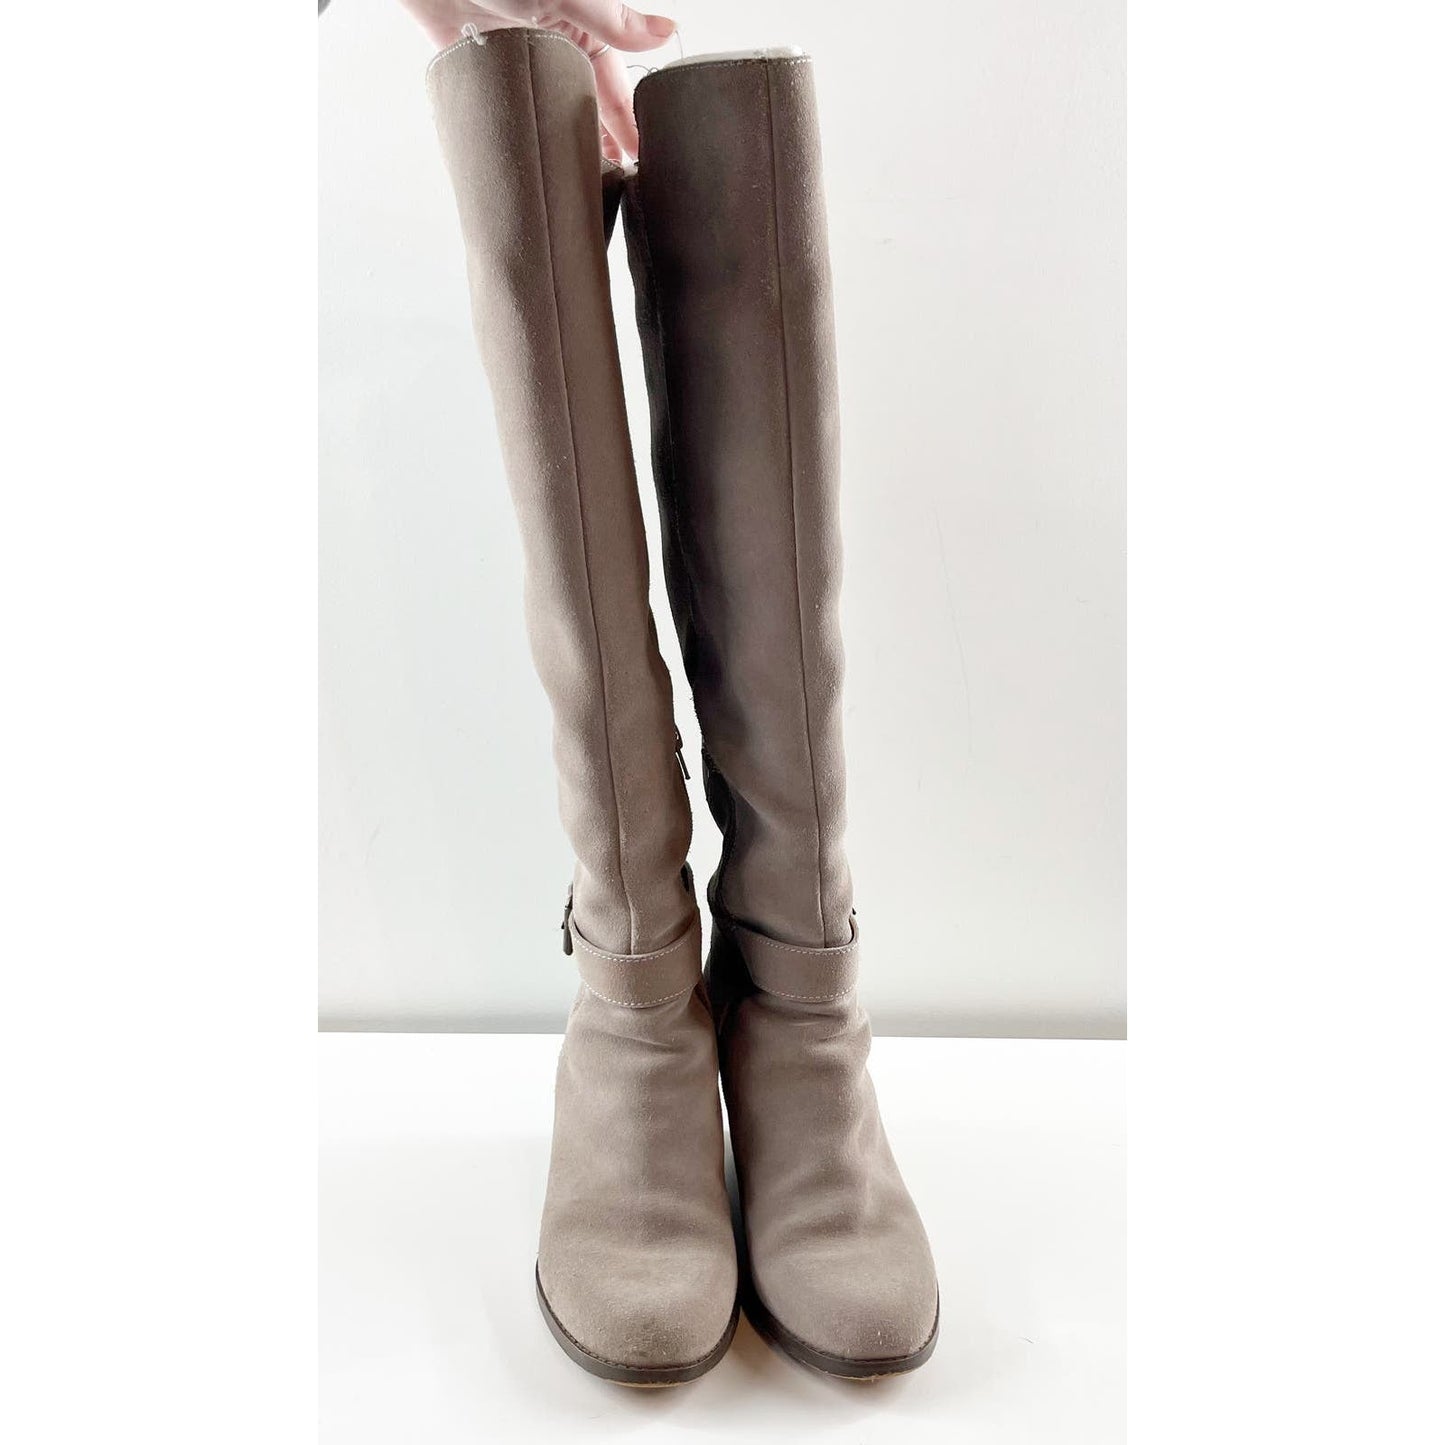 Sole Society Paloma Suede Knee High Wedge Boots Mushroom Gray 7.5